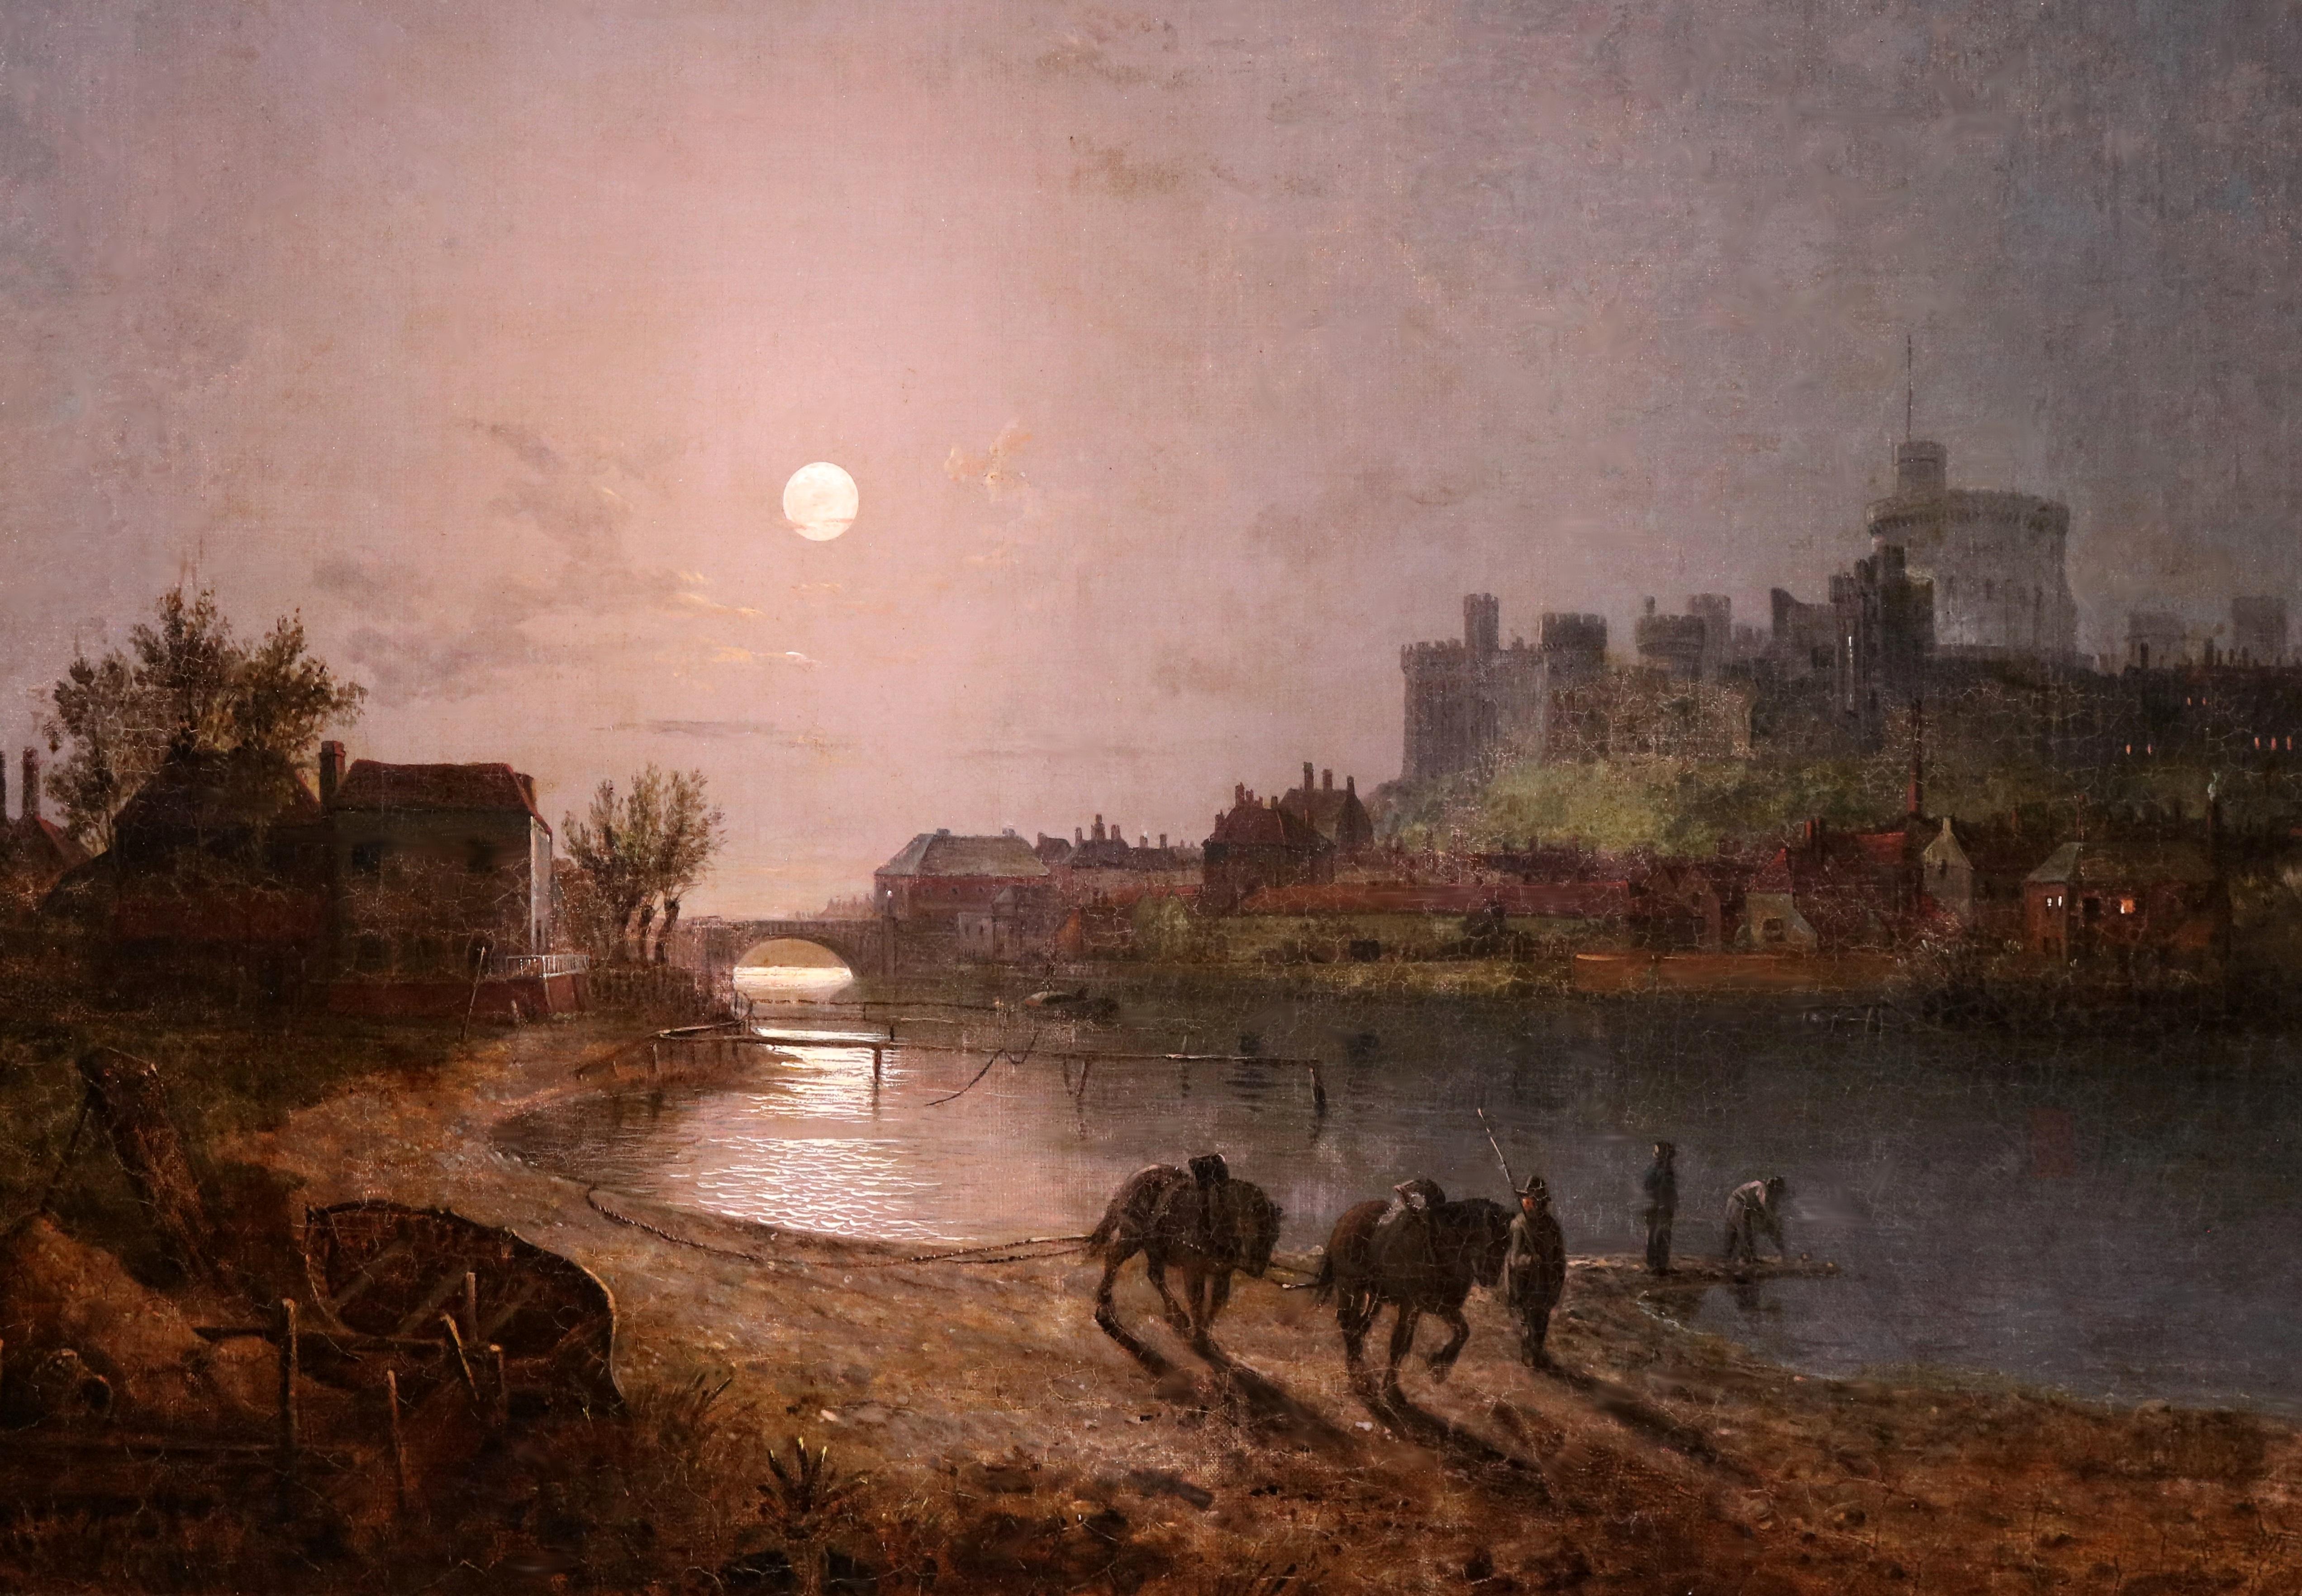 Scene on the Thames - Moonlight - Early 19th Century Nocturne Landscape Painting 1